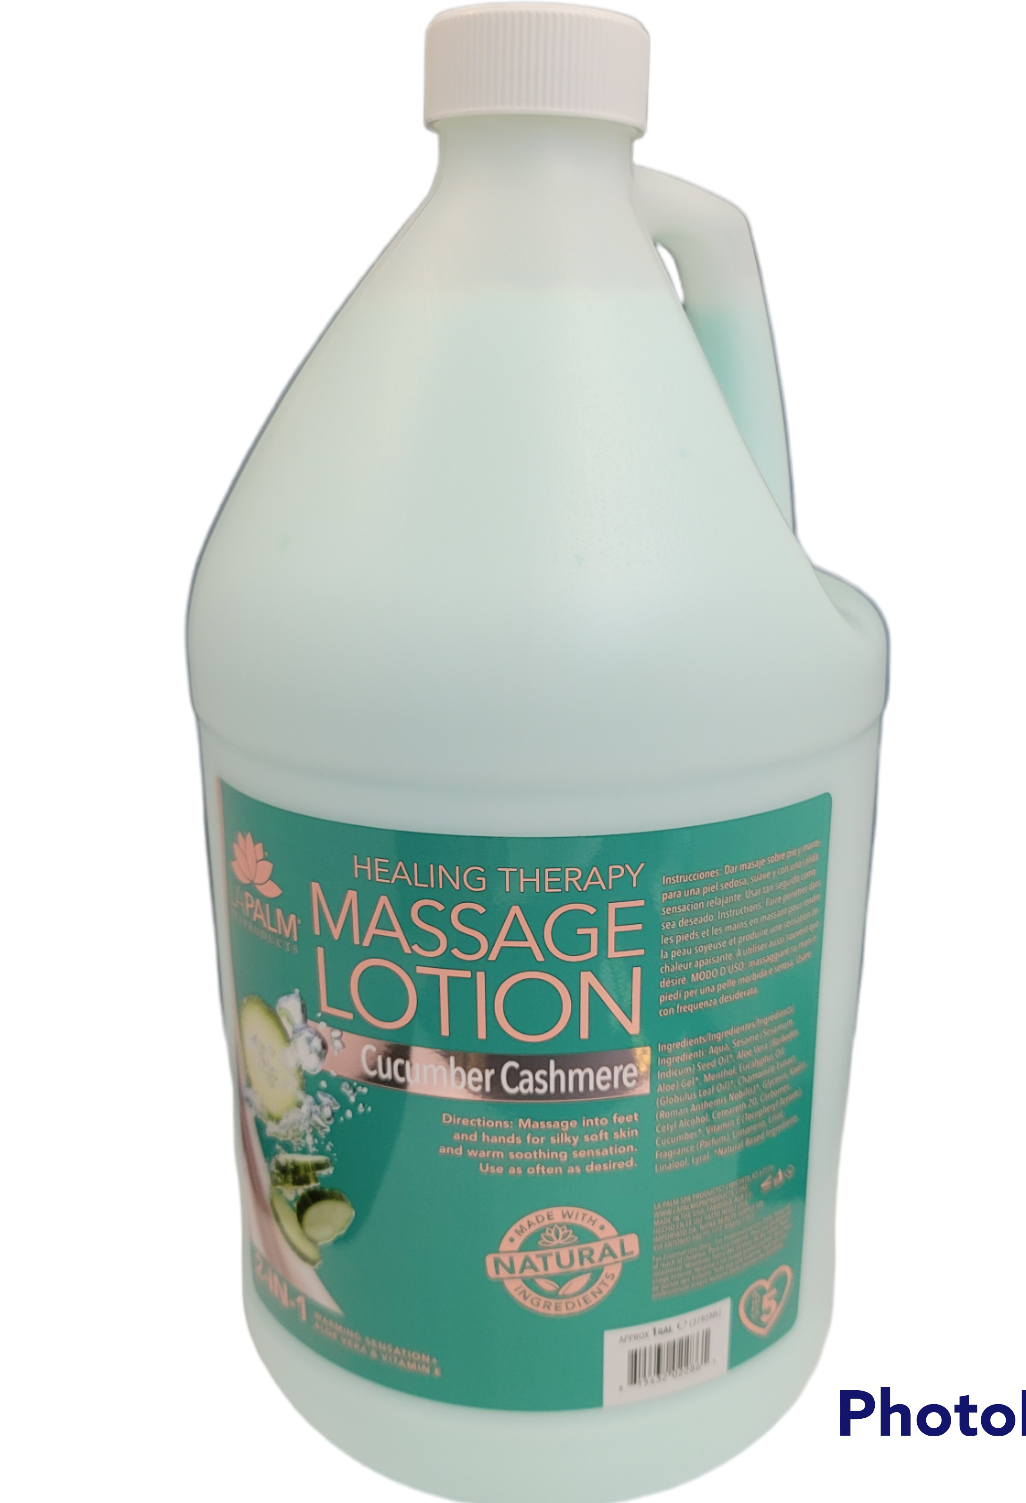 Lapalm Healing Therapy Collagen Massage Lotion Cucumber Cashmere - 2 gallons